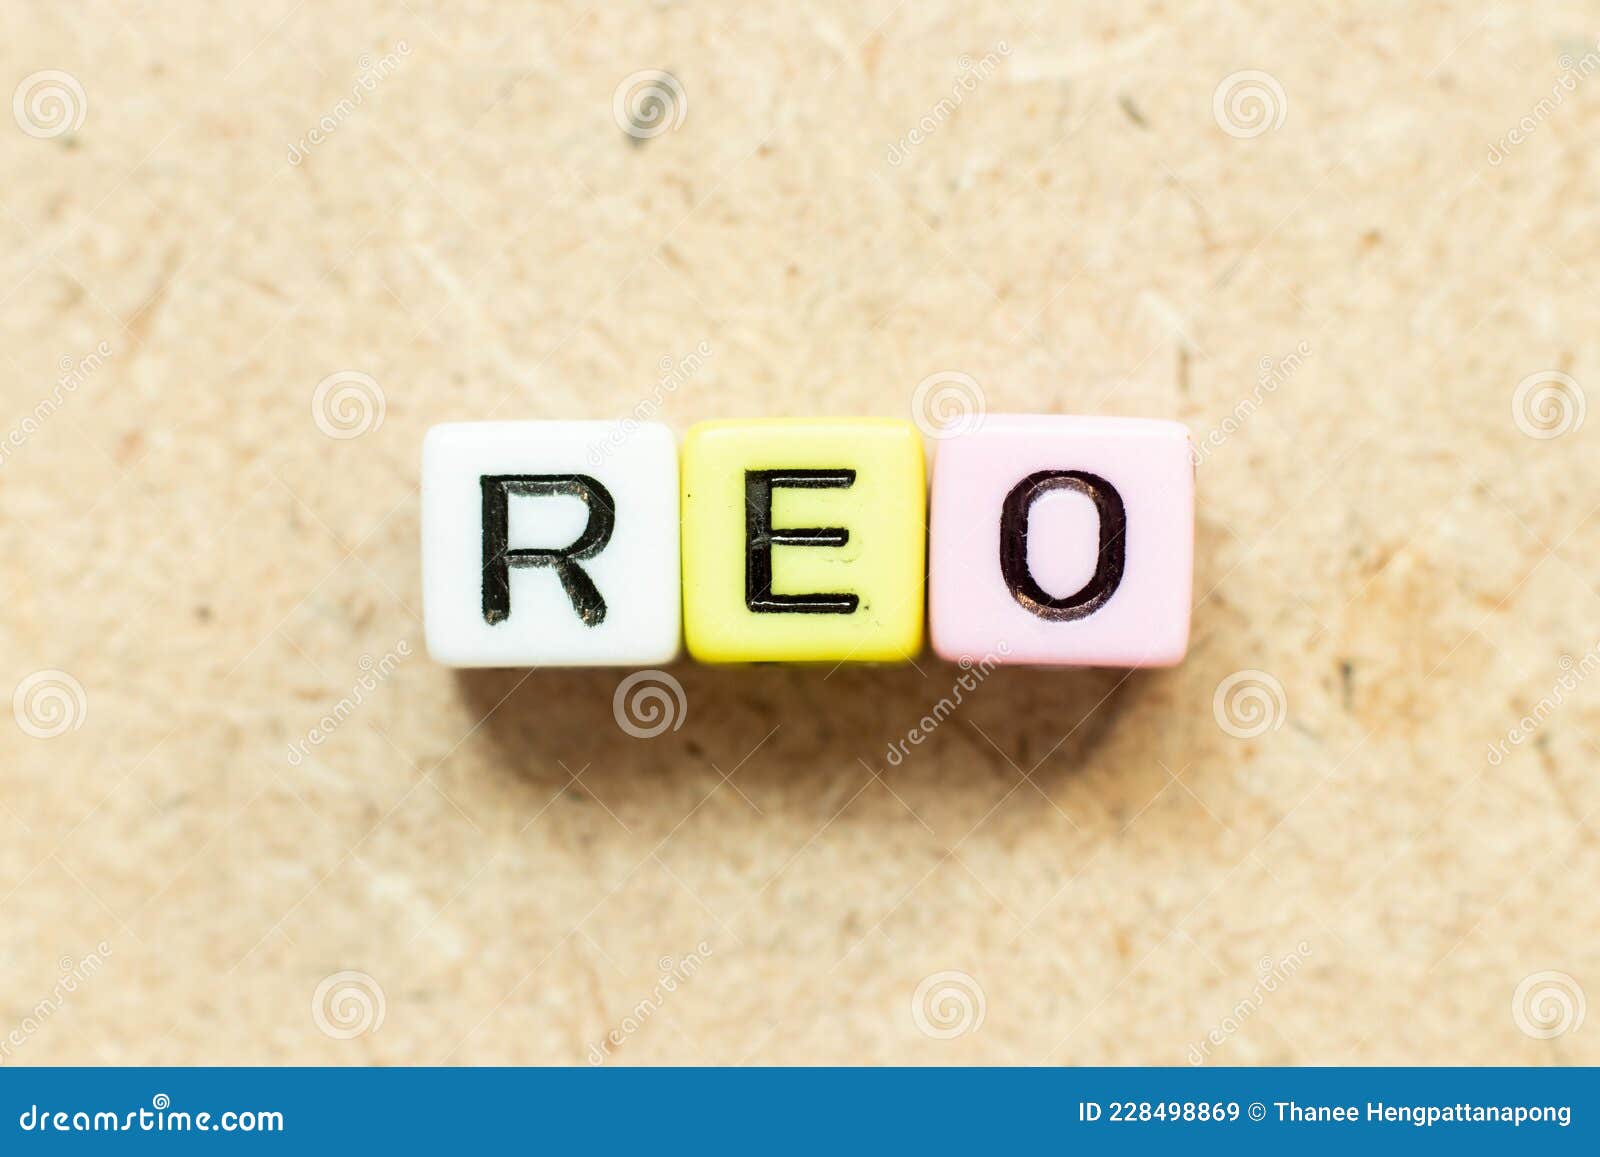 color letter block in word reo abbreviation of real estate owned on wood background